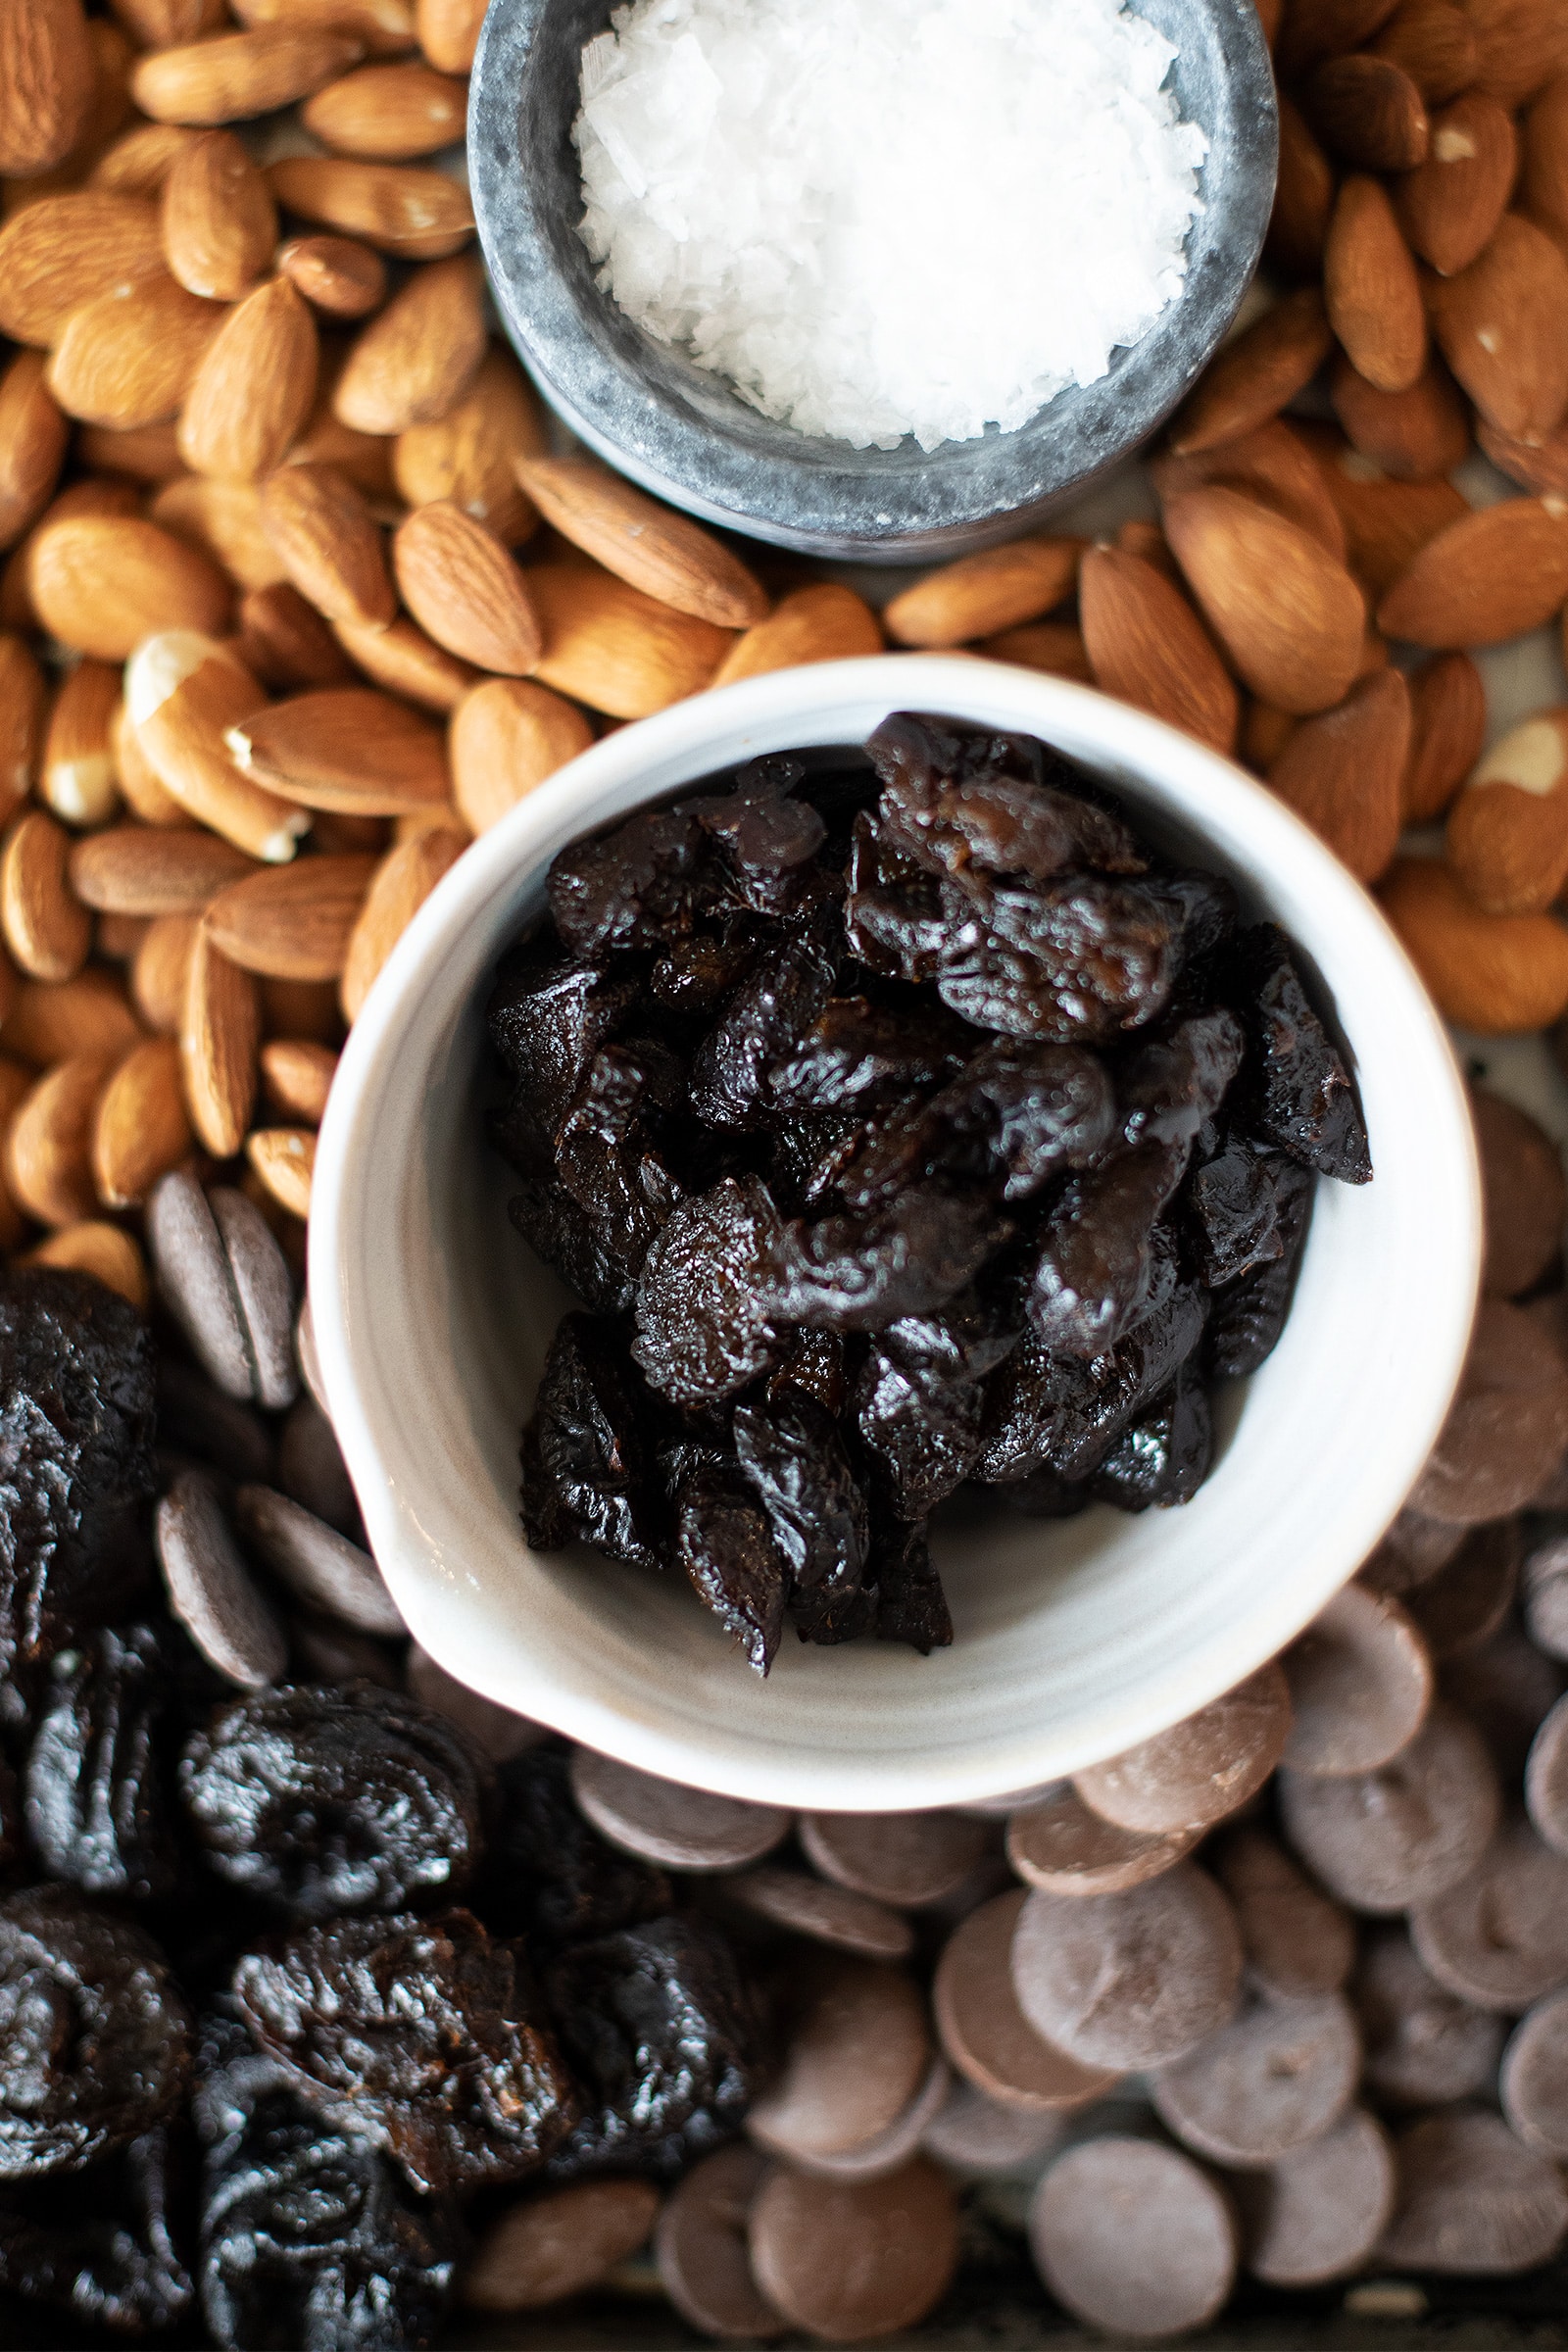 Chocolate Covered Prune And Almond Clusters Recipe